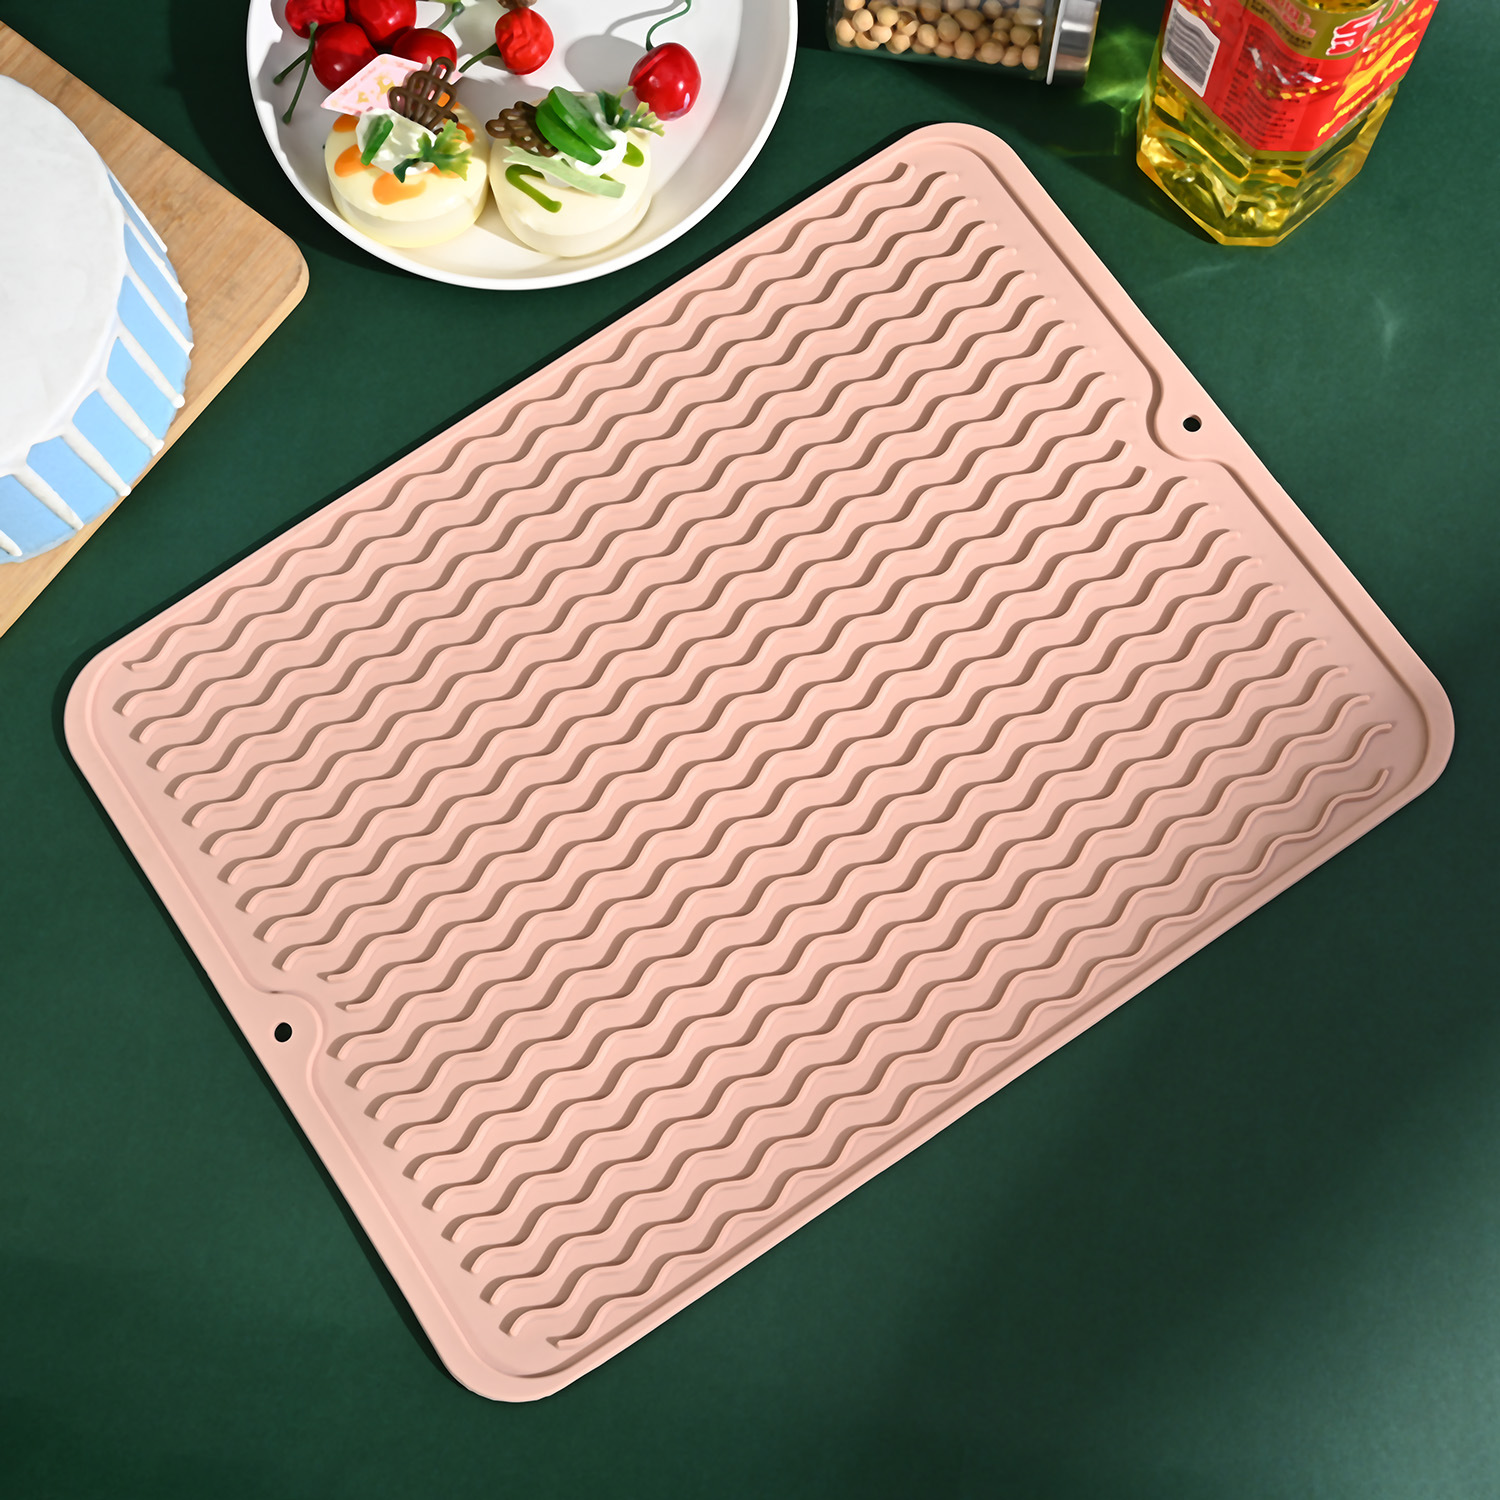 Multifunctional Heat Proof Mat Dining Table Cushion Silicone Draining Pad Kitchen Tableware Water Filter Pad Water Cup Control Pad Wholesale